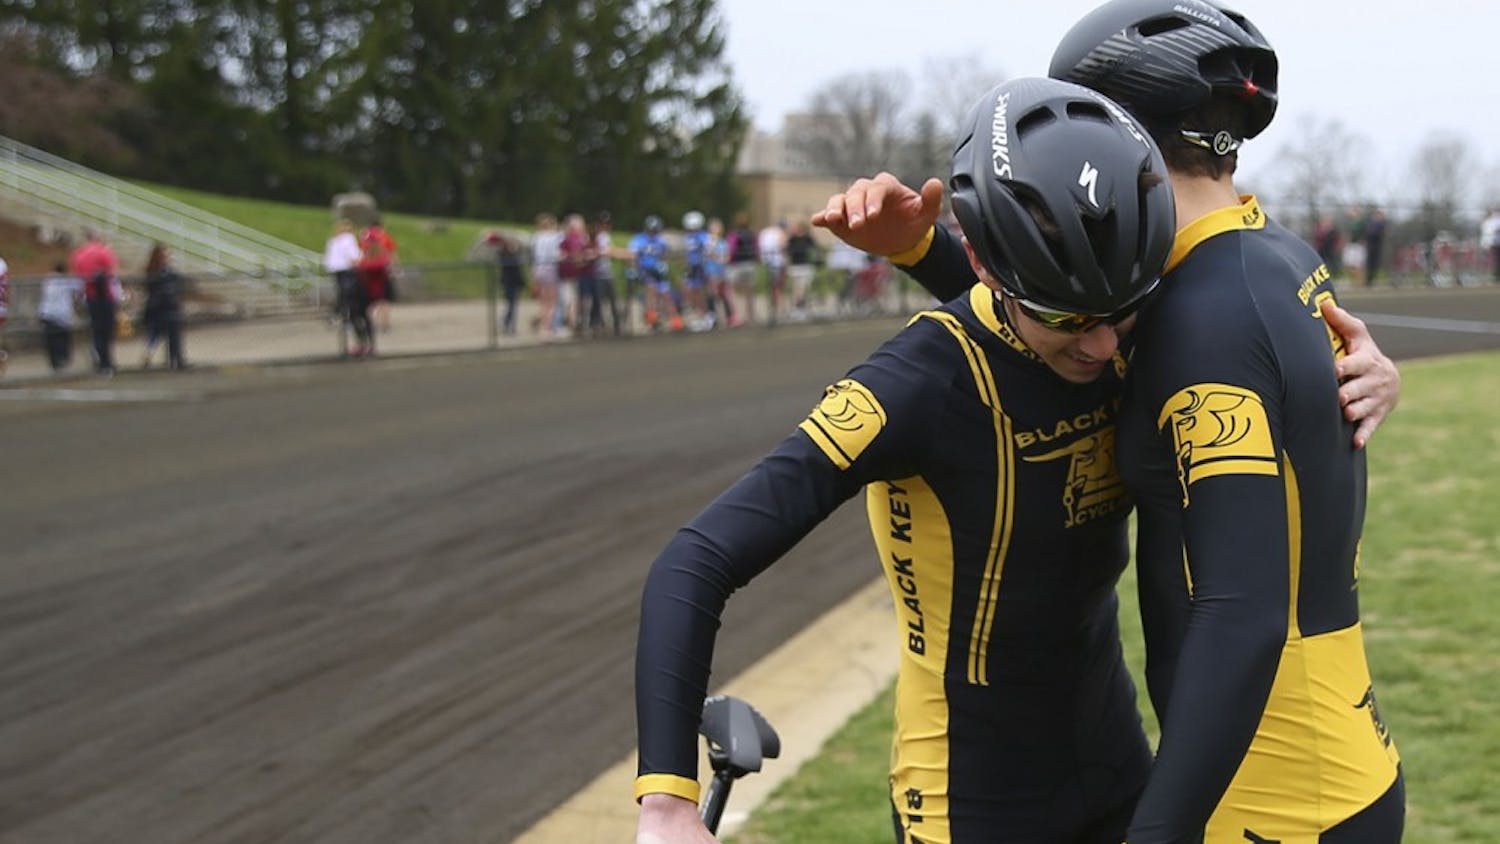 Black Key Bulls riders embrace after their qualification bid at the Bill Armstrong Stadium Saturday.  BKB qualified for the 2017 Little 500 Bike Race with a time of 02:26.5.